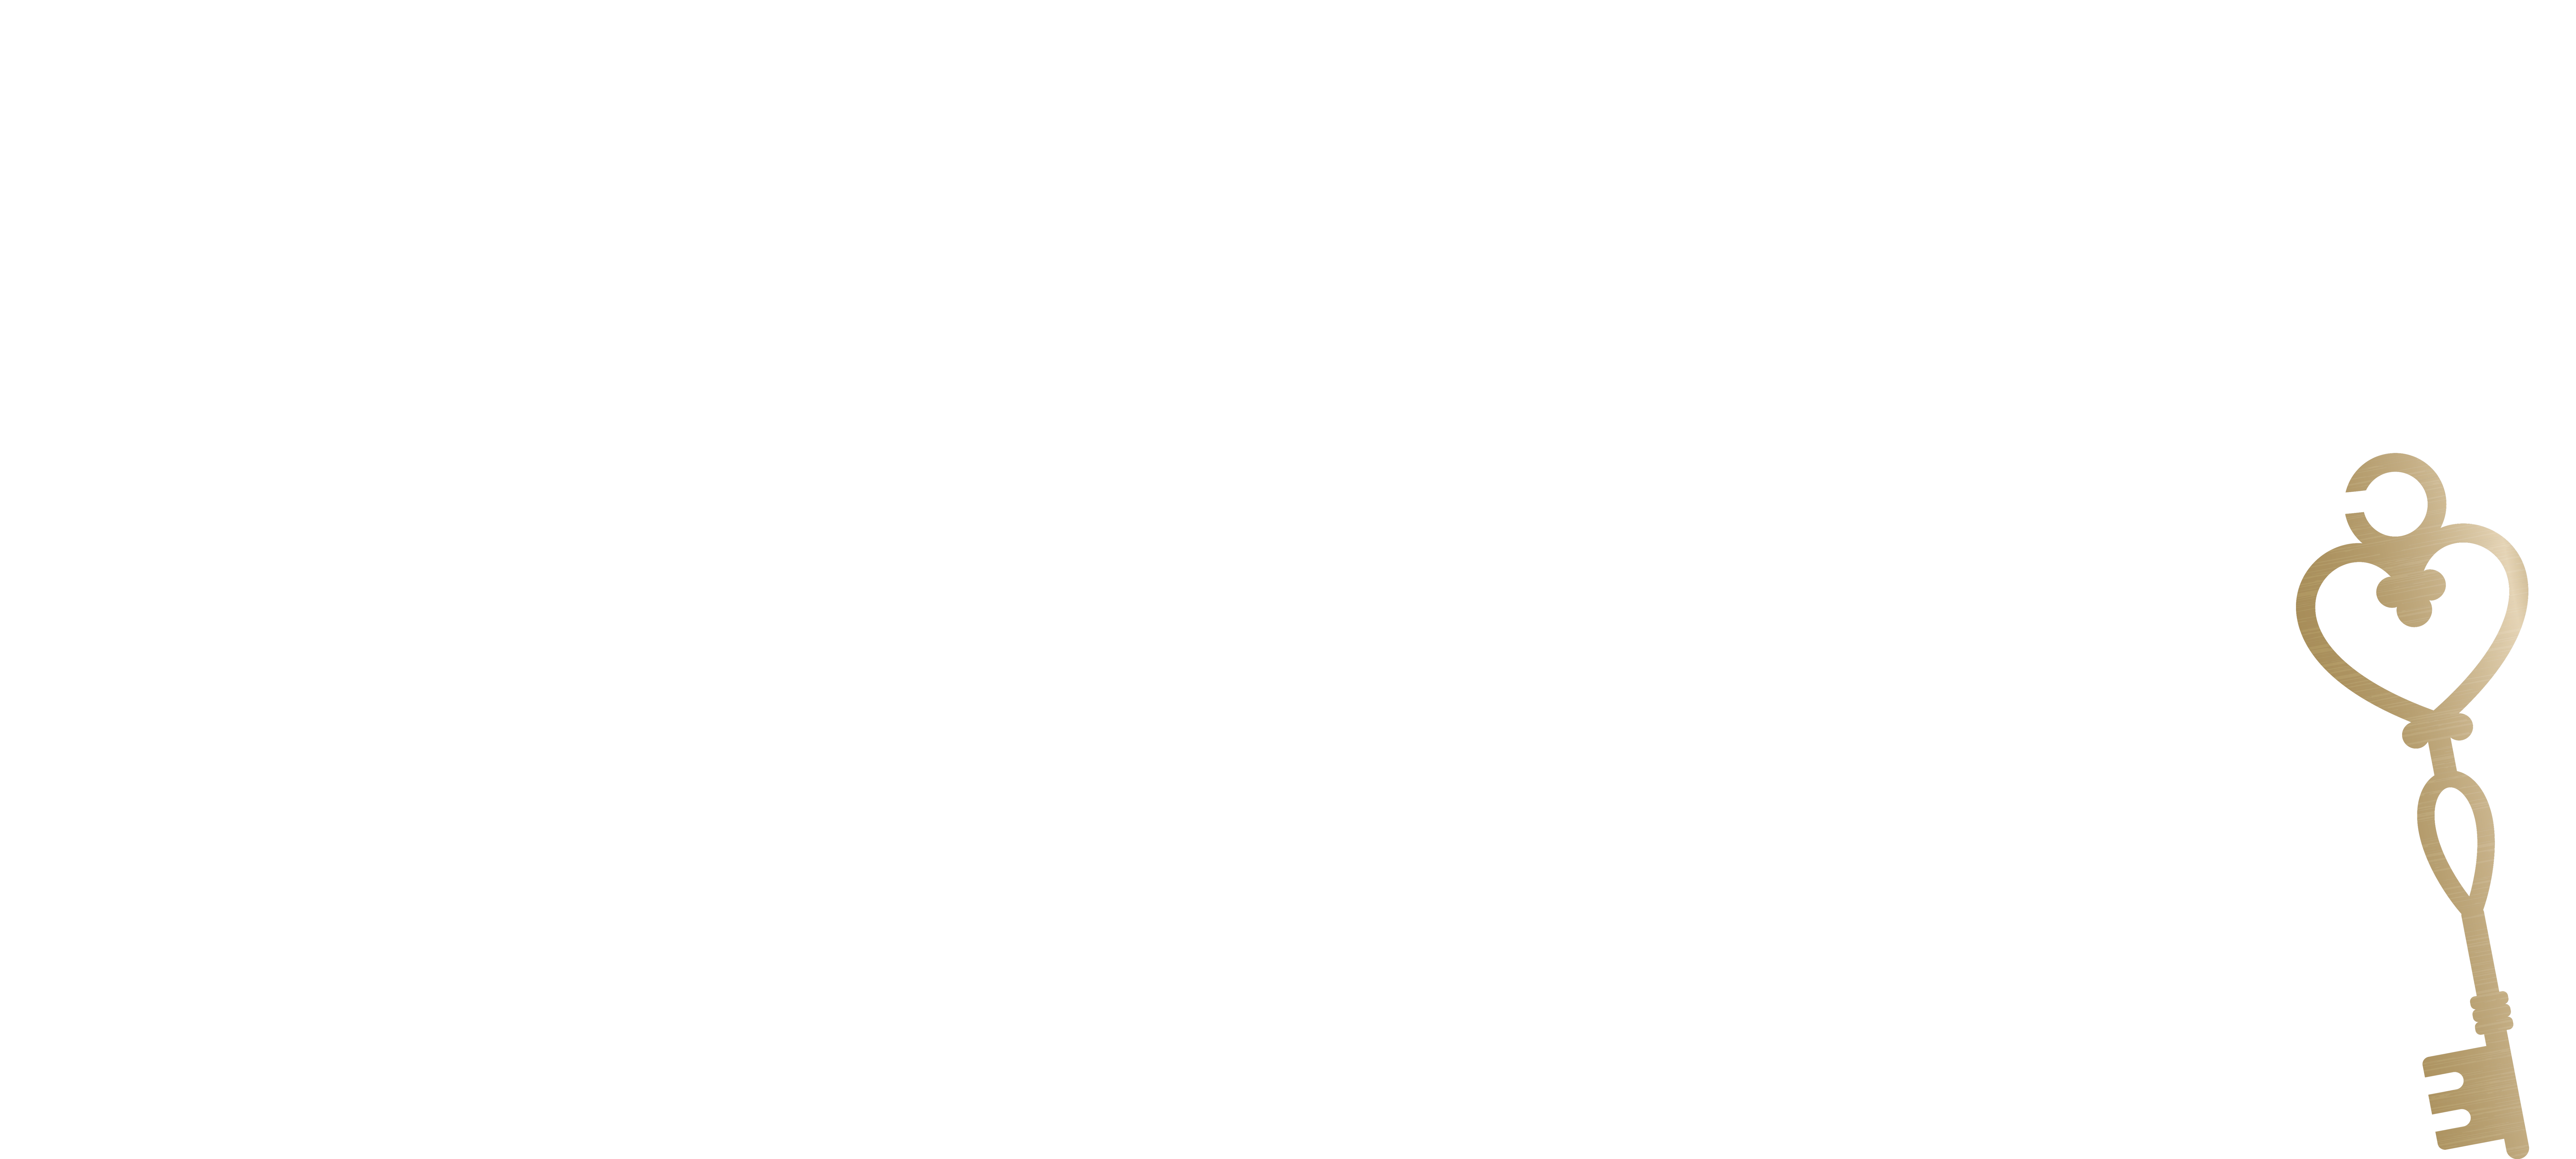 hs Janie & Coletter - Logo - White and gold